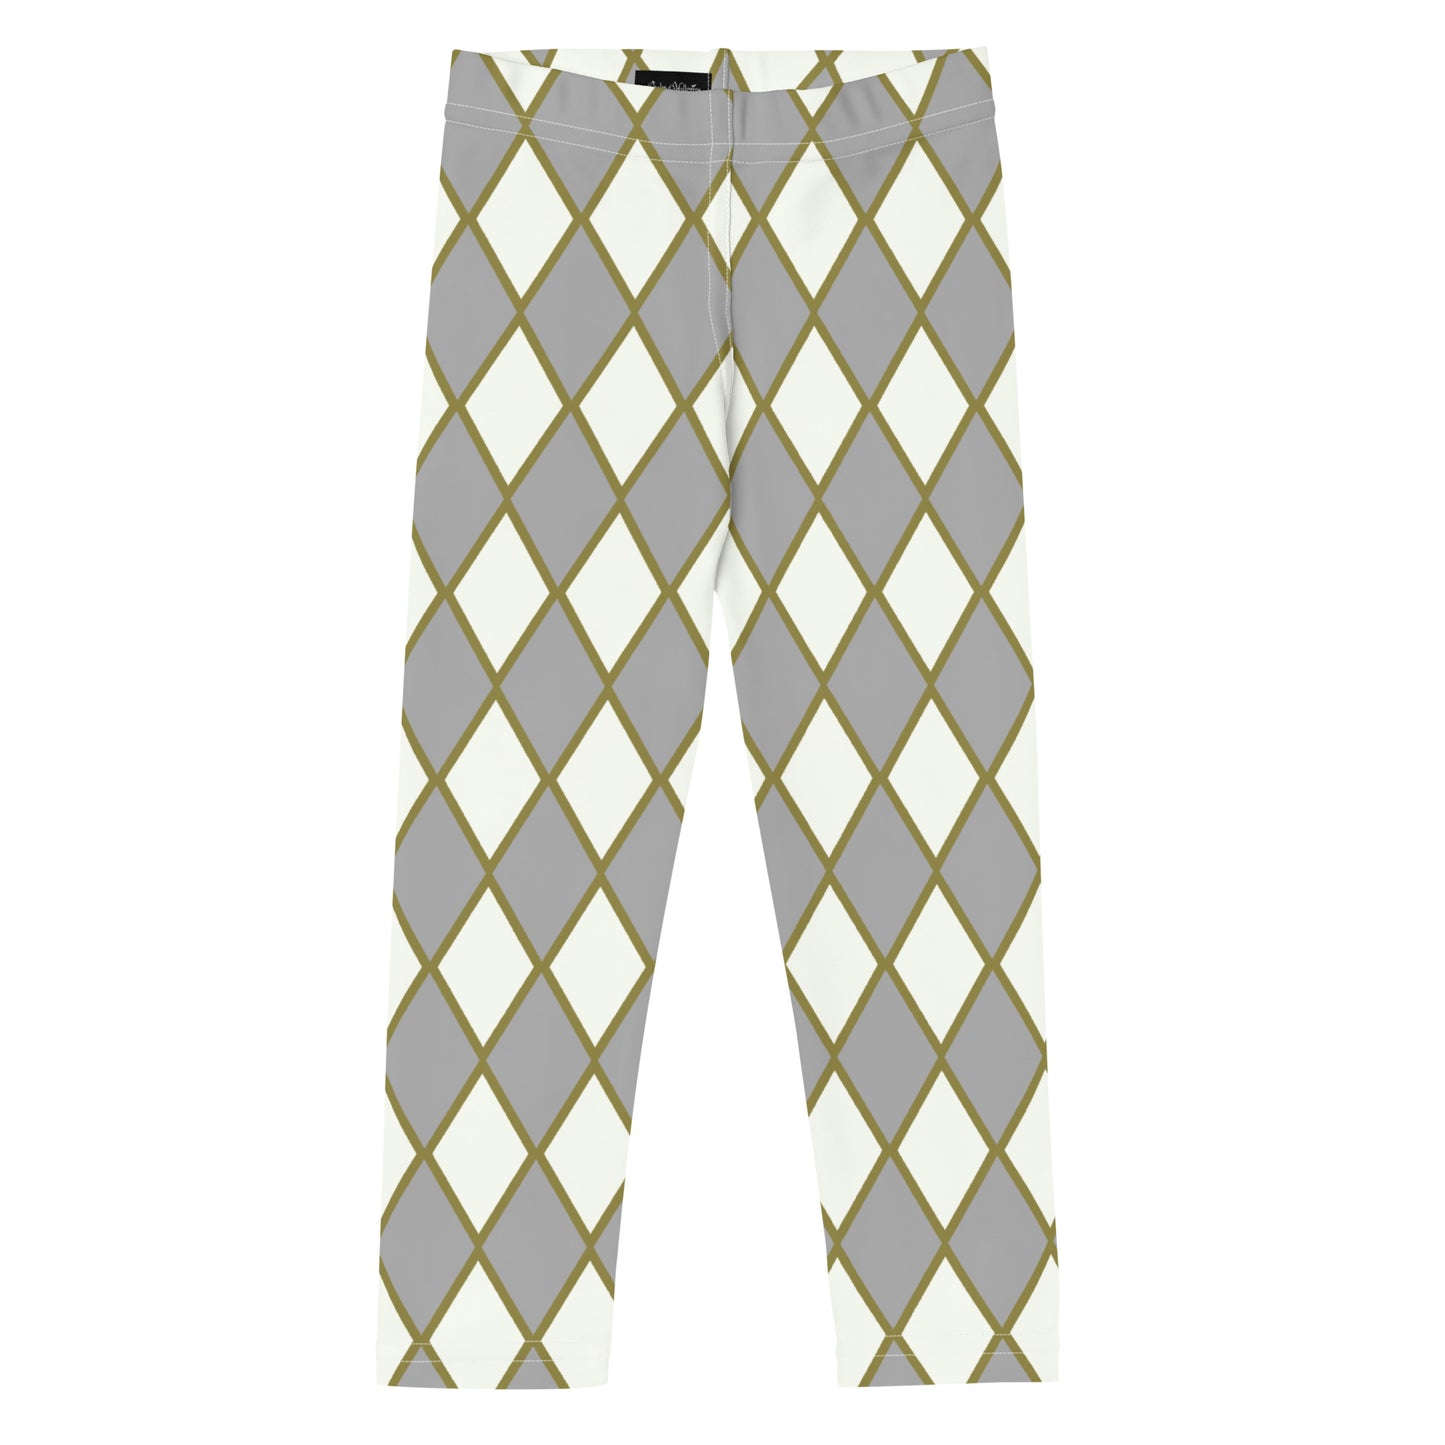 Harlequin, Cream, Grey, and Caramel Children’s Leggings, from the Already Royal Collection